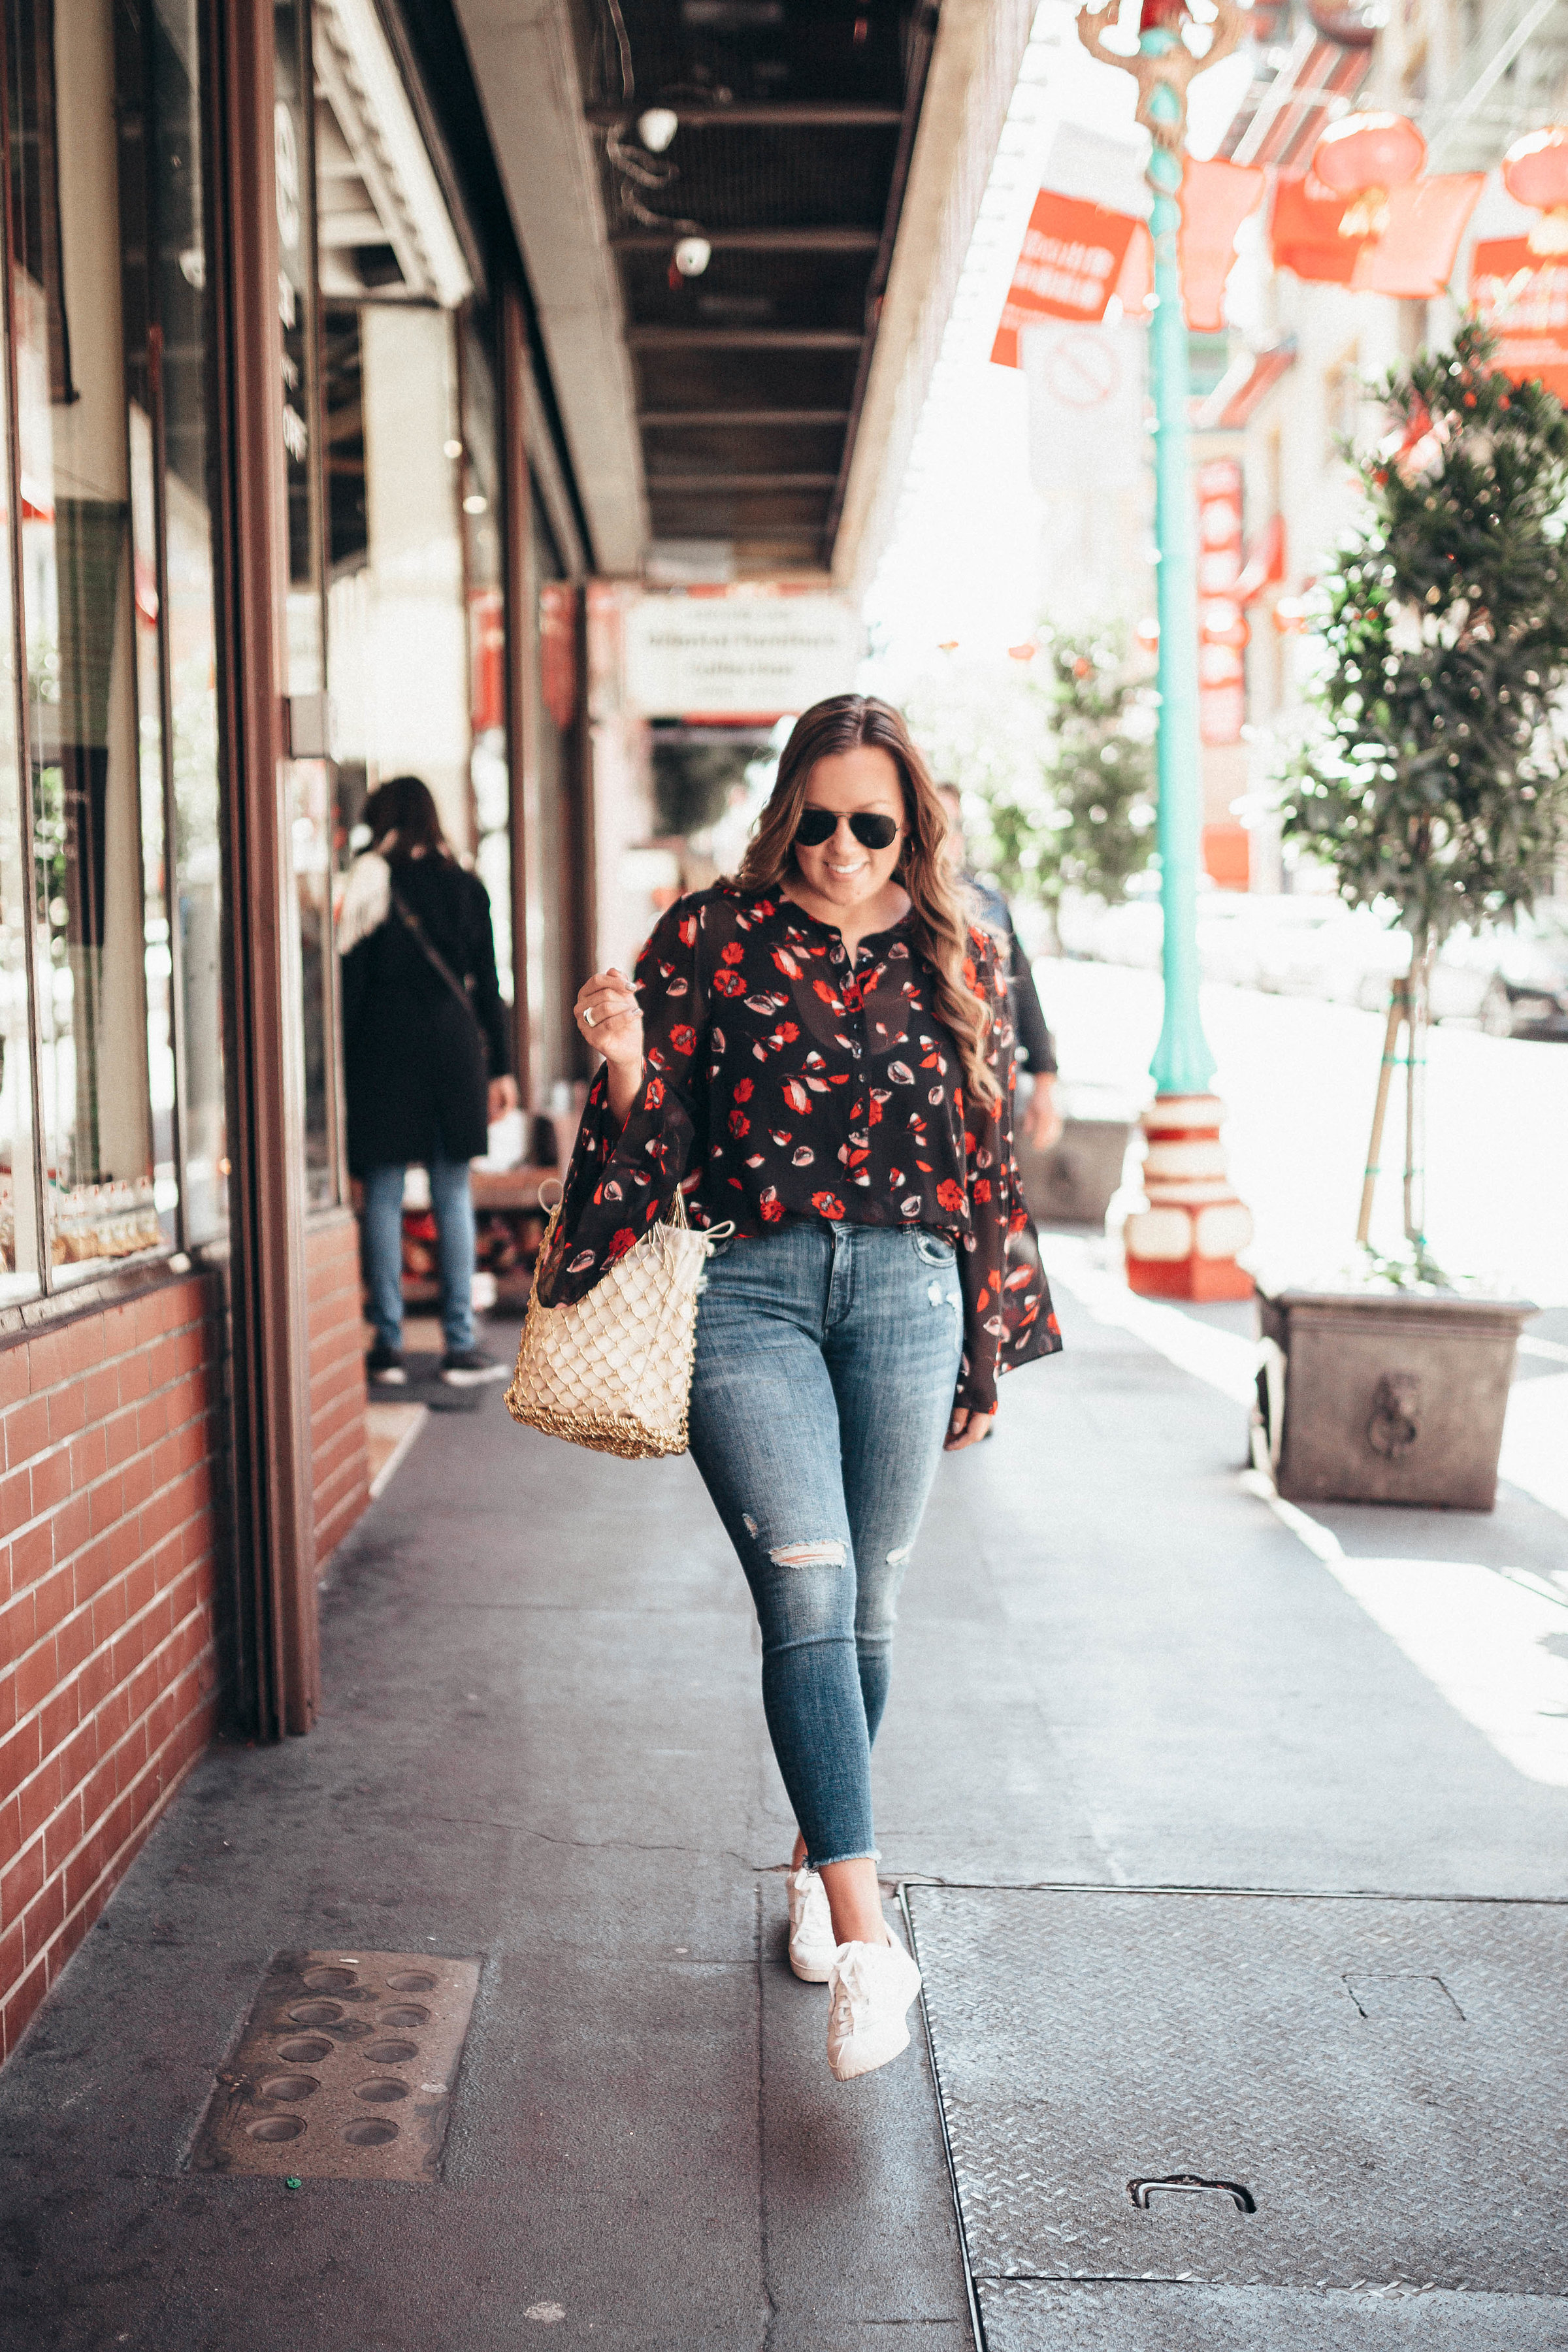 Ashley Zeal from Two Peas in a Prada shares her top picks for the last call of the Shopbop Sale. Get 25% off sitewide. Her jeans and sneakers on sale!